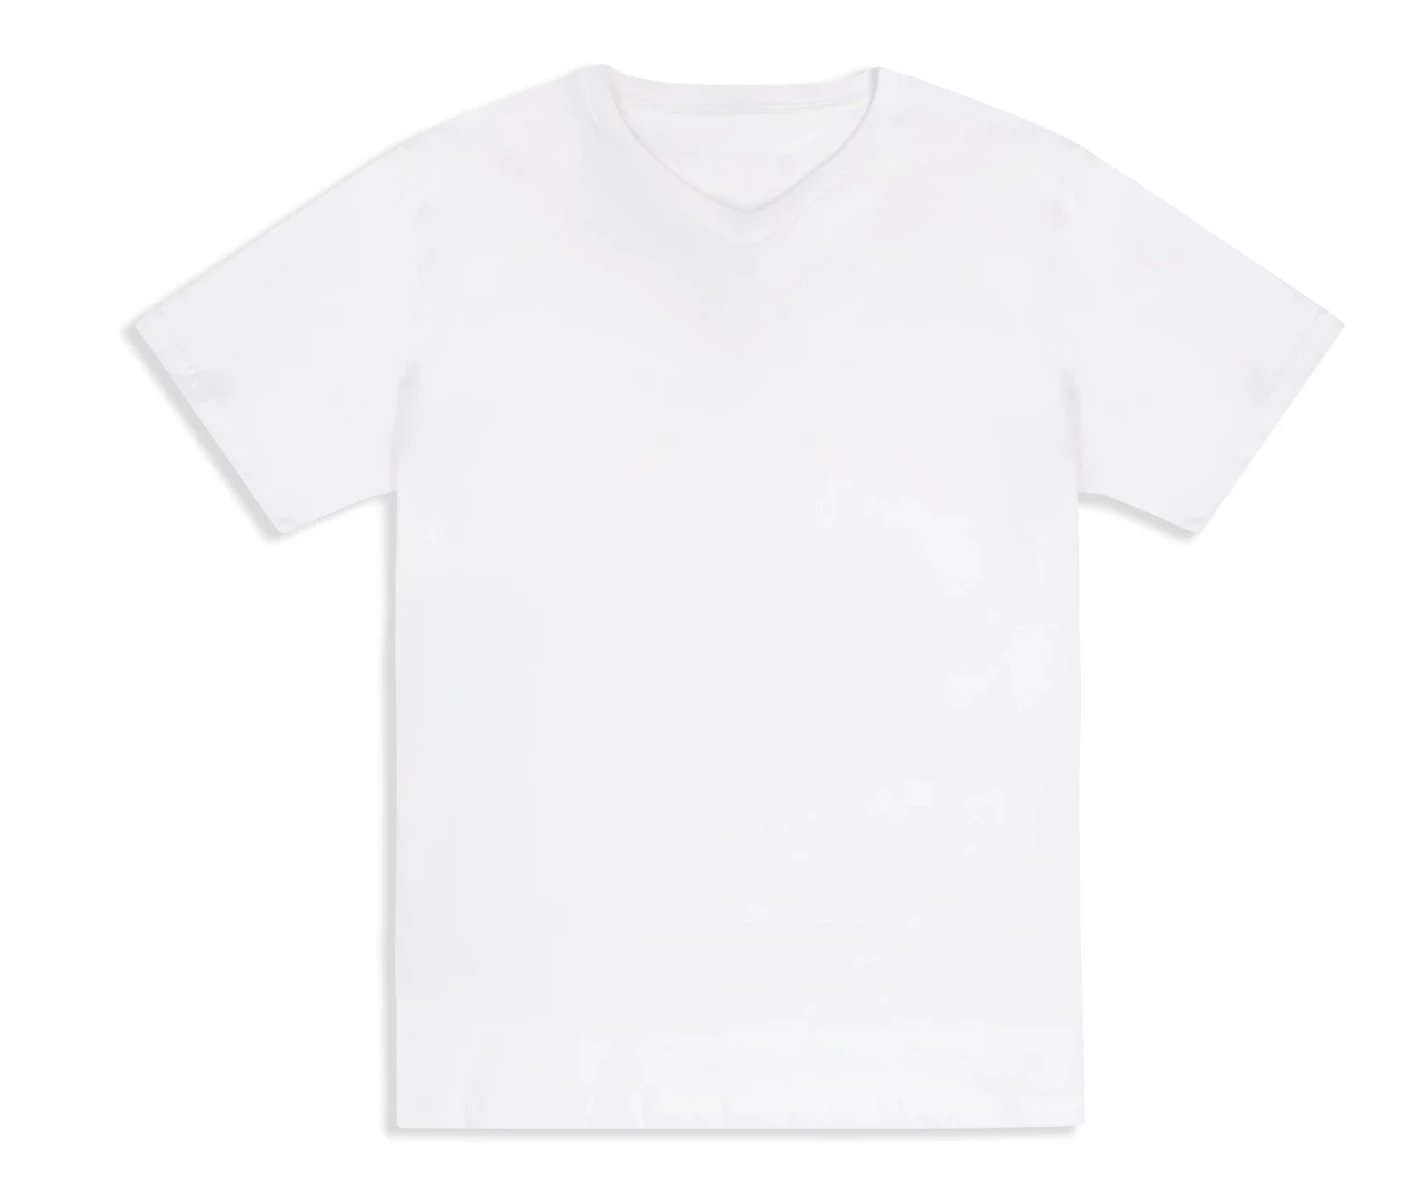 Organic Men’s Tee Made from Milk Waste in White Color – Mi Terro